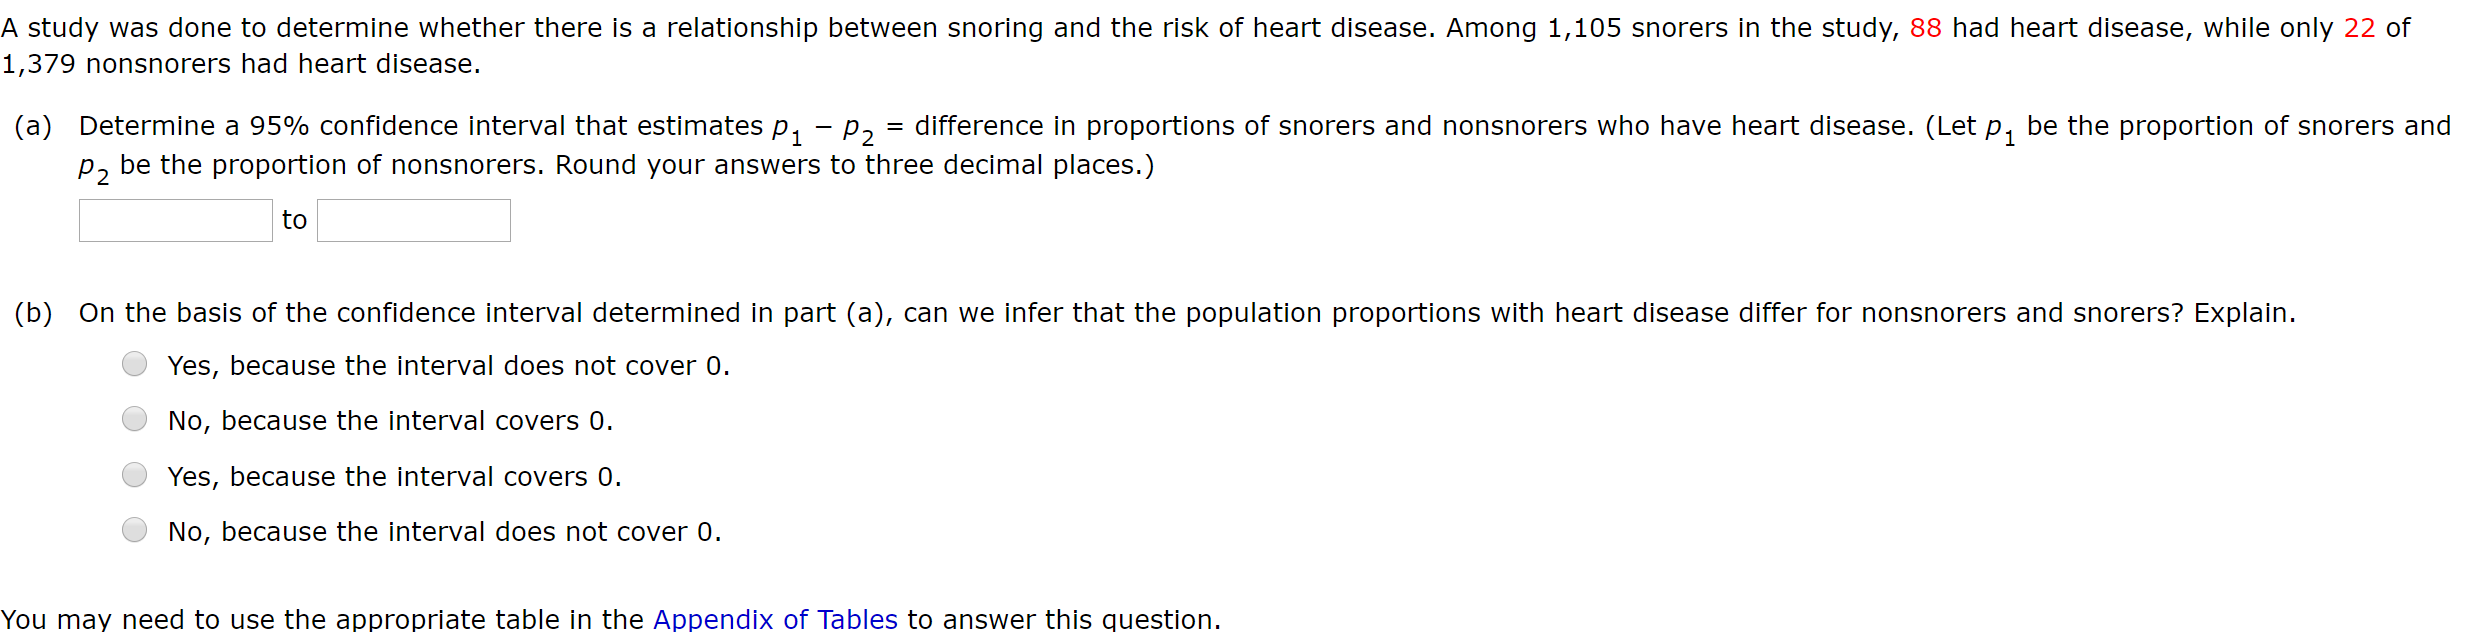 A study was done to determine whether there is a relationship between snoring and the risk of heart disease. Among 1,105 snorers in the study, 88 had heart disease, while only 22 of
1,379 nonsnorers had heart disease.
(a) Determine a 95% confidence interval that estimates p, – p = difference in proportions of snorers and nonsnorers who have heart disease. (Let p, be the proportion of snorers and
p, be the proportion of nonsnorers. Round your answers to three decimal places.)
to
(b) On the basis of the confidence interval determined in part (a), can we infer that the population proportions with heart disease differ for nonsnorers and snorers? Explain.
Yes, because the interval does not cover 0.
No, because the interval covers 0.
Yes, because the interval covers 0.
No, because the interval does not cover 0.
You may need to use the appropriate table in the Appendix of Tables to answer this question.
